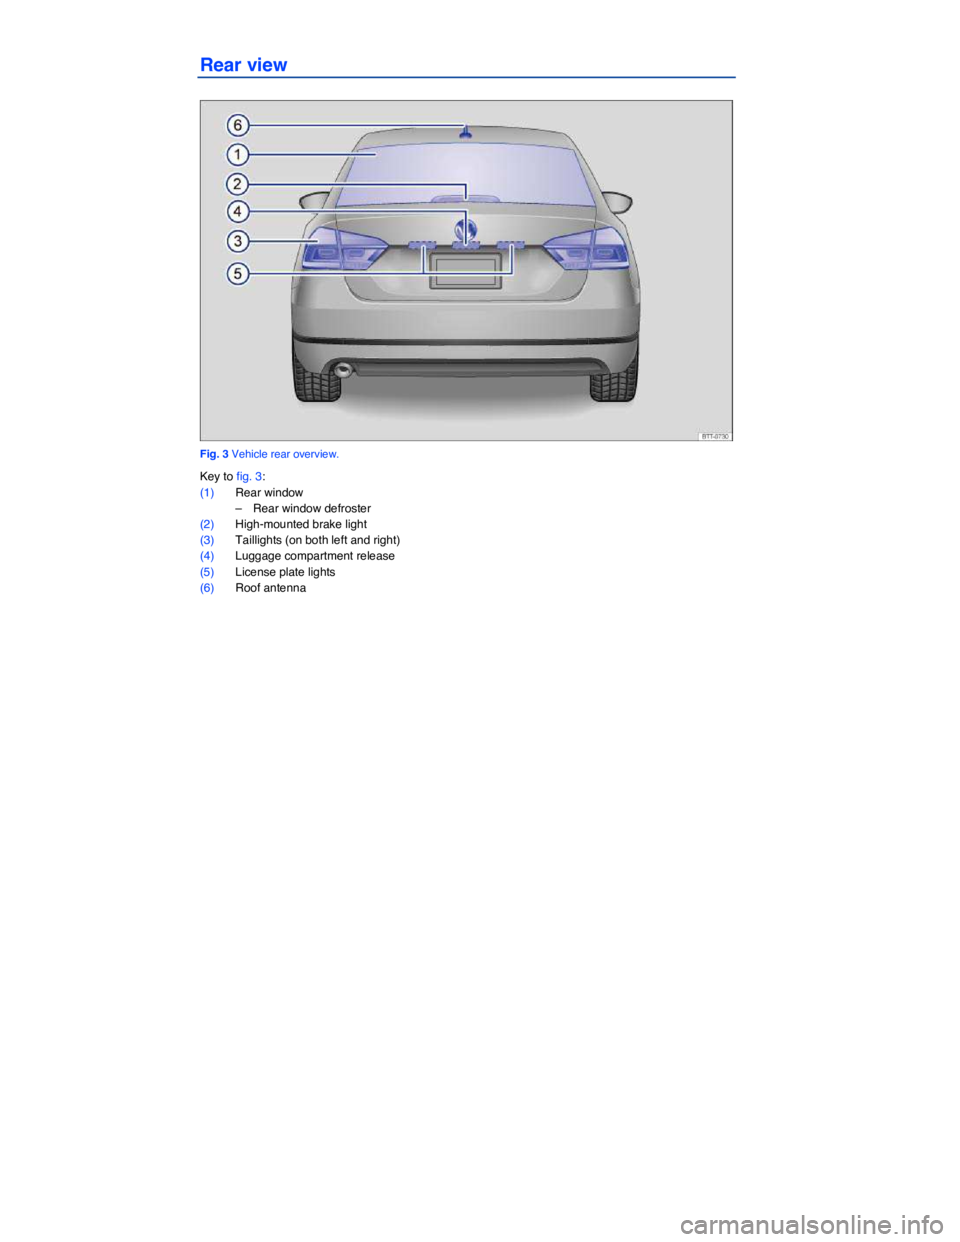 VOLKSWAGEN PASSAT 2006  Owners Manual  
Rear view 
 
Fig. 3 Vehicle rear overview. 
Key to fig. 3: 
(1) Rear window 
–  Rear window defroster  
(2) High-mounted brake light 
(3) Taillights (on both left and right)  
(4) Luggage compartm